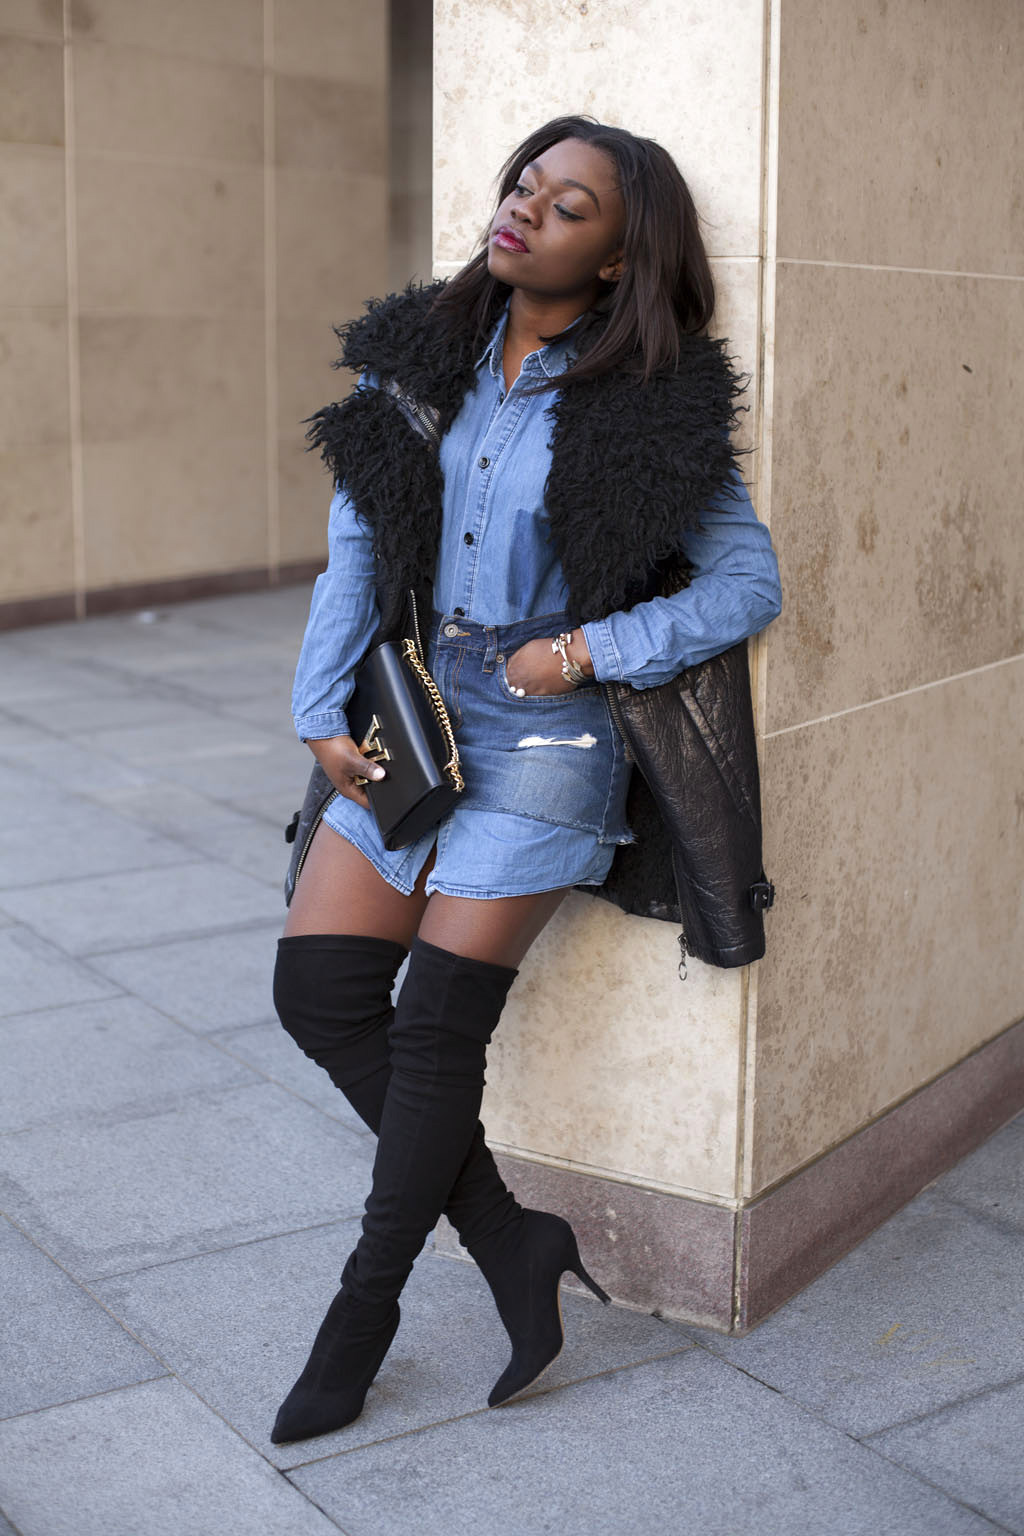 JUST DOING ME - Mirror Me | London Fashion, Travel & Personal ...